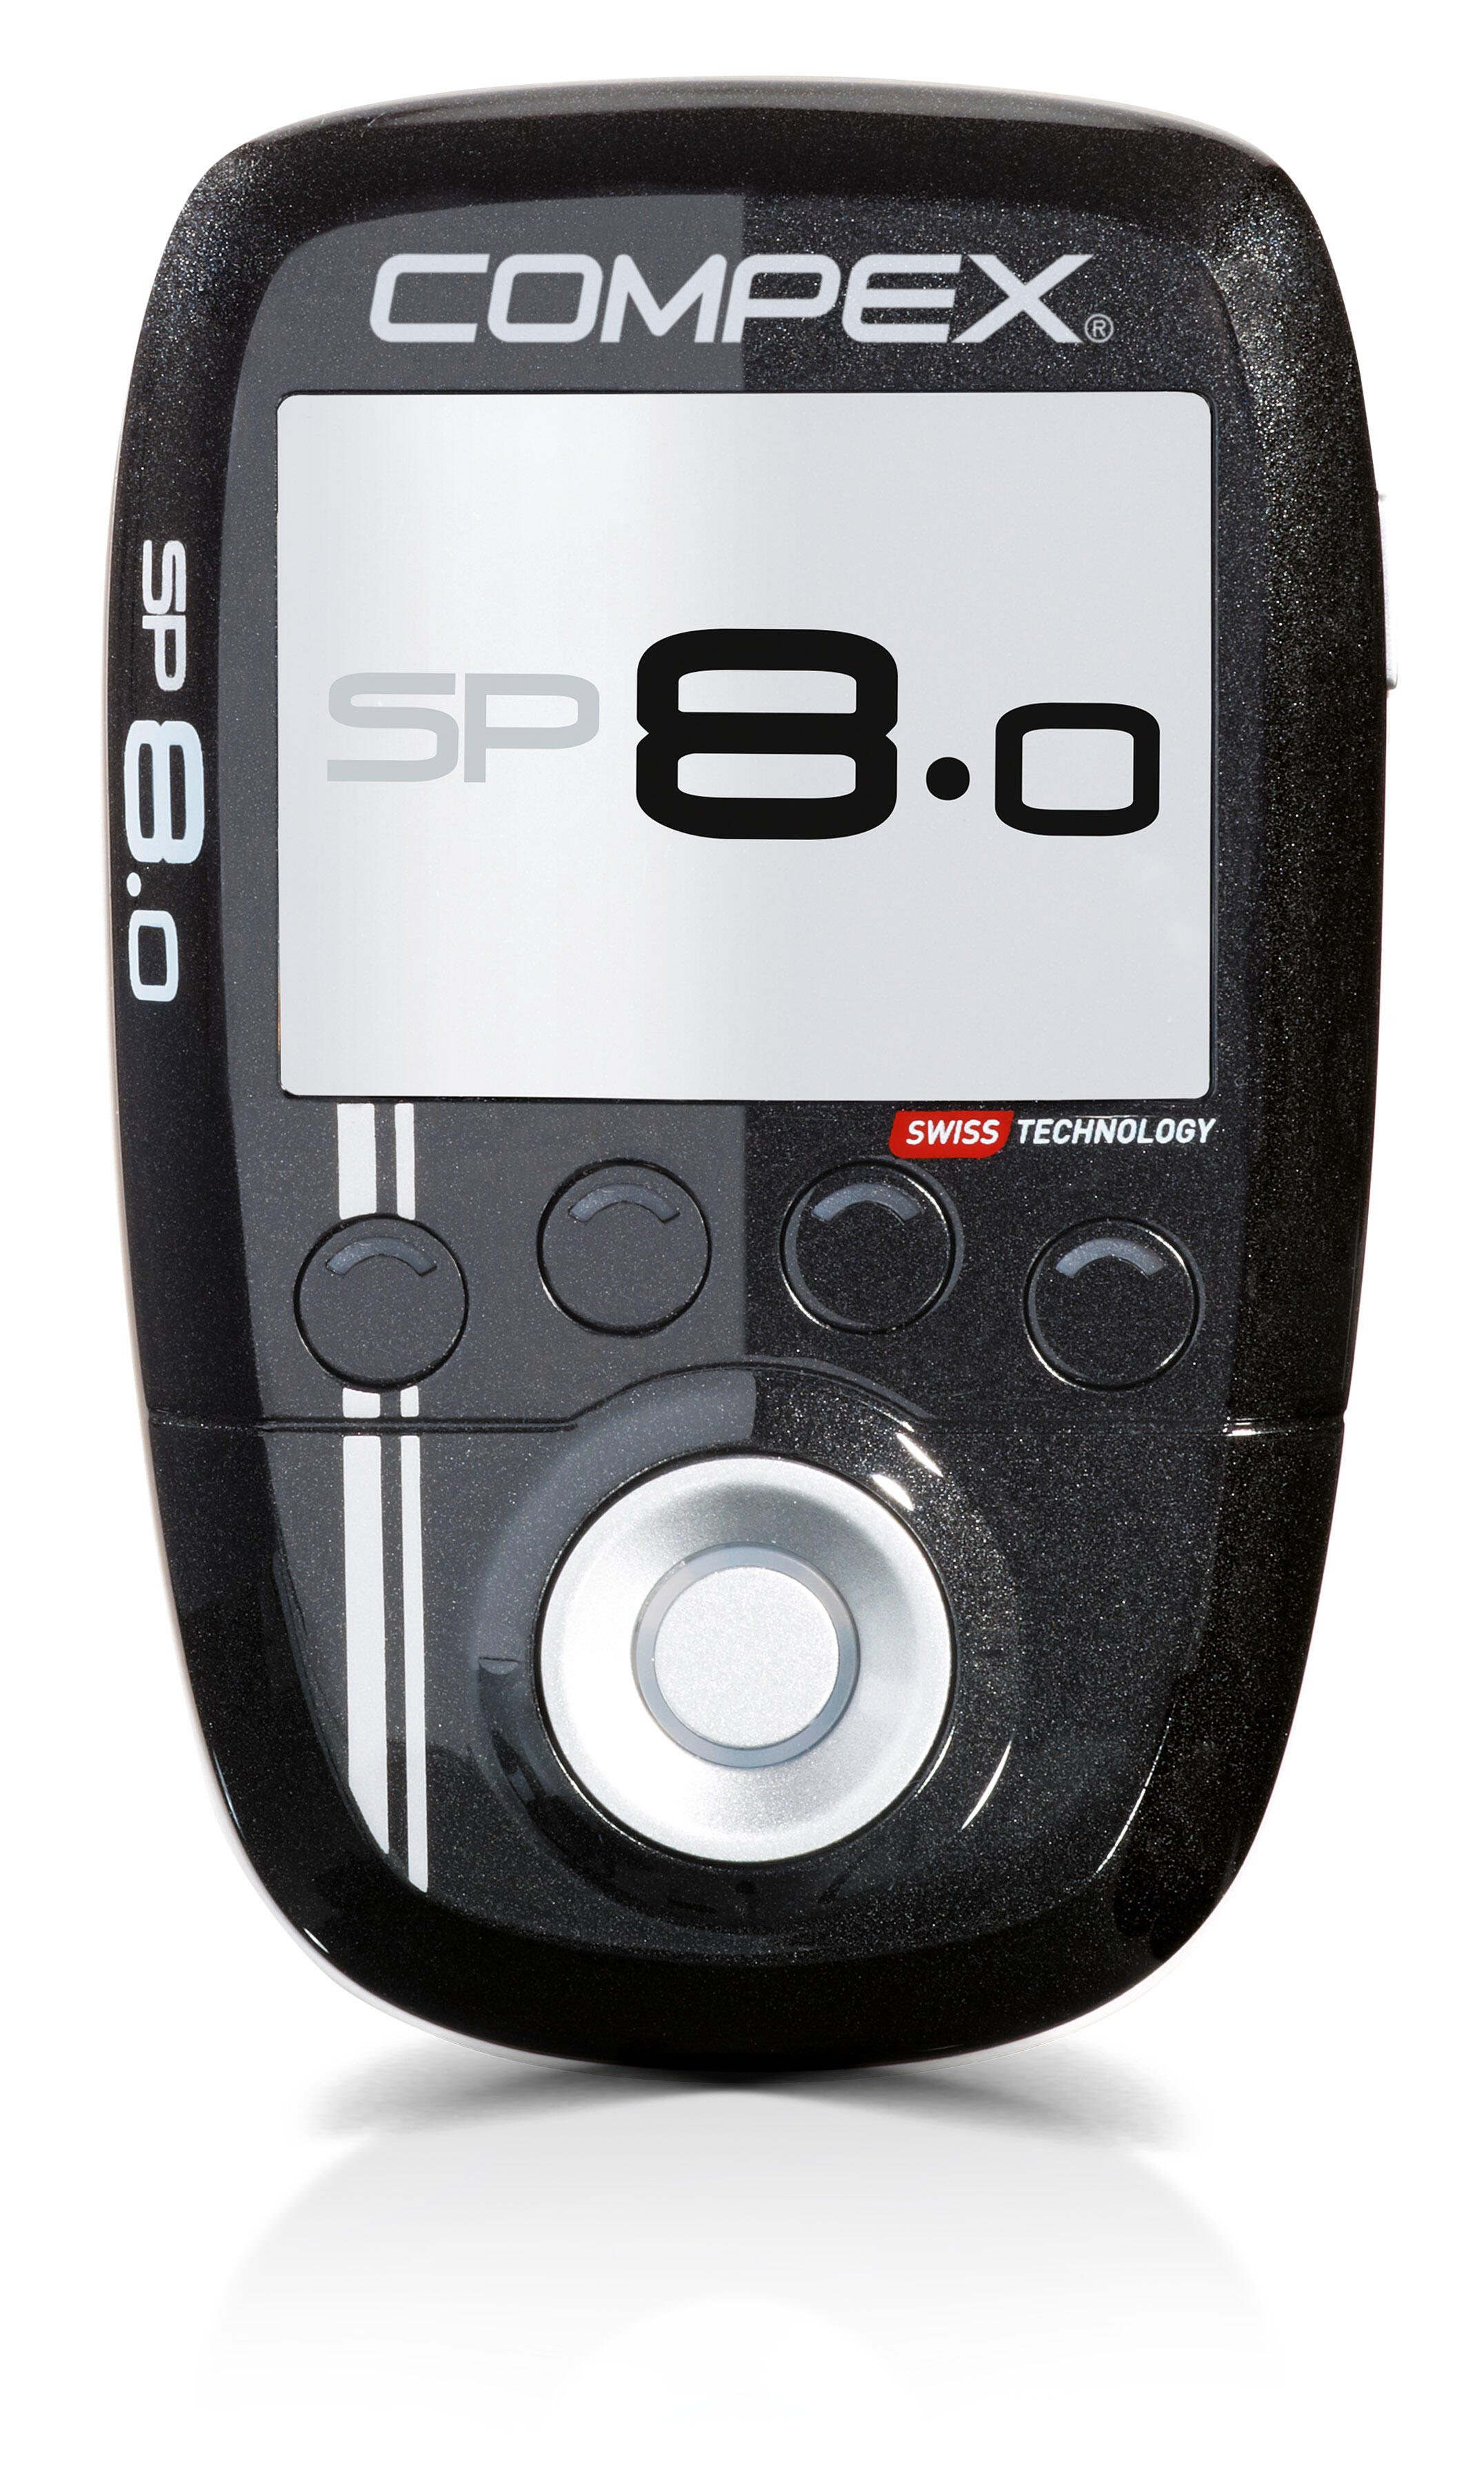 Compex SP 8.0 Muscle Stimulator To Empower Your Training 1/8